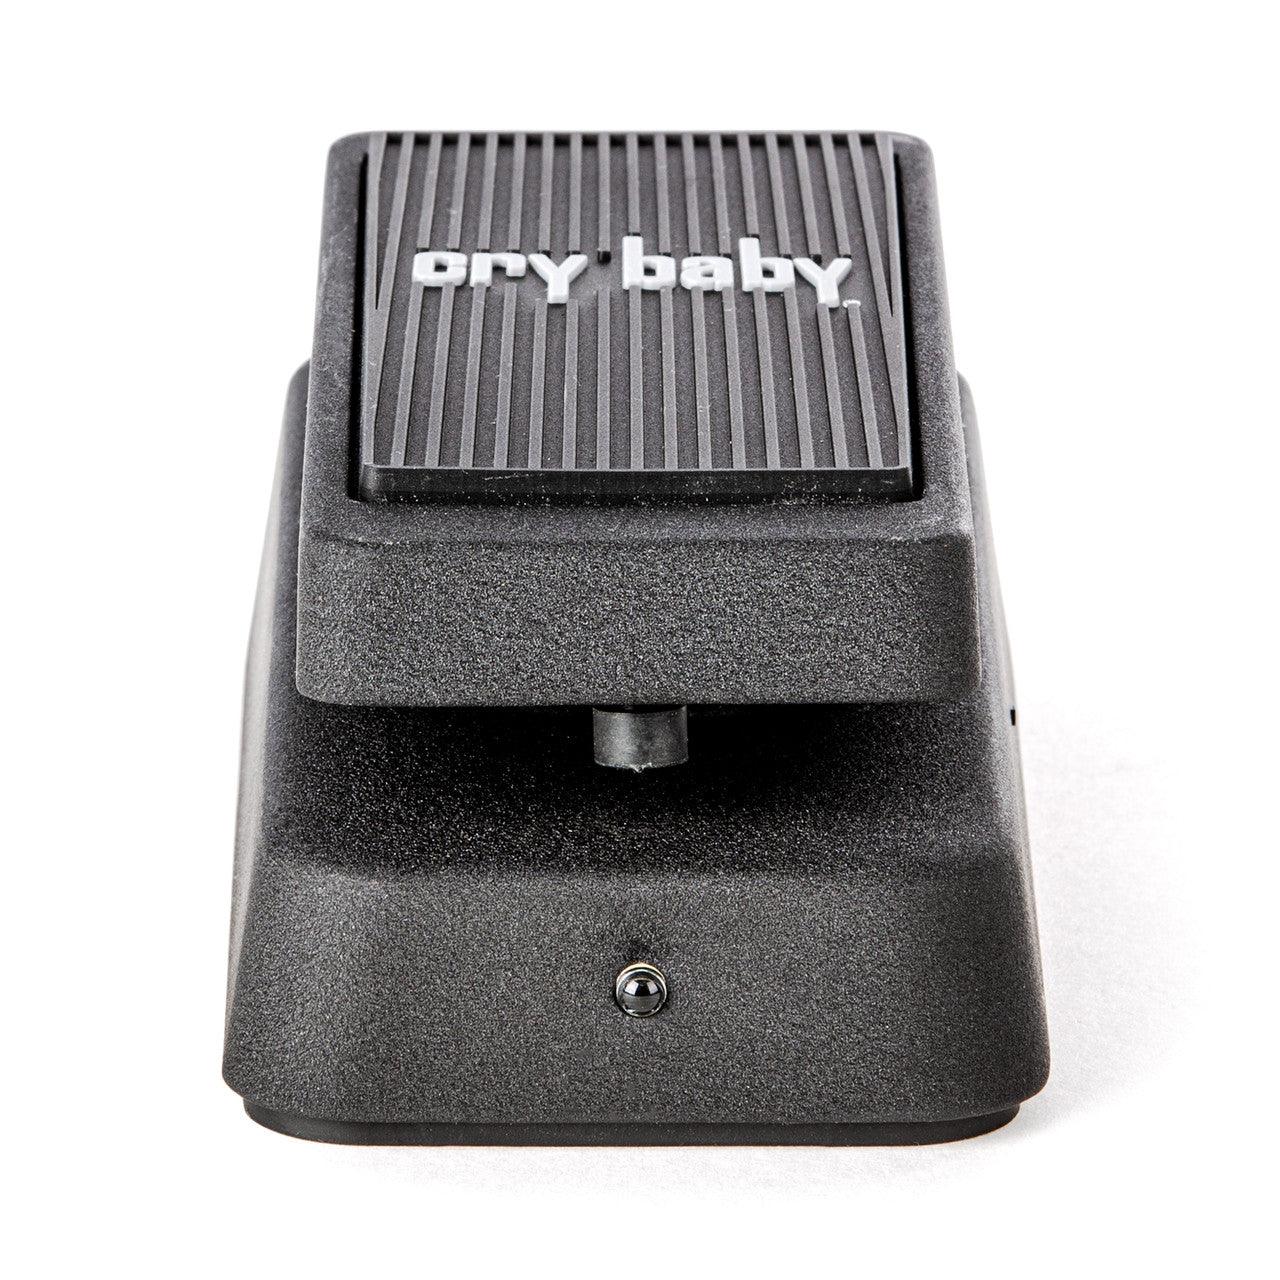 Dunlop Crybaby Junior Wah Pedal - Muso's Stuff